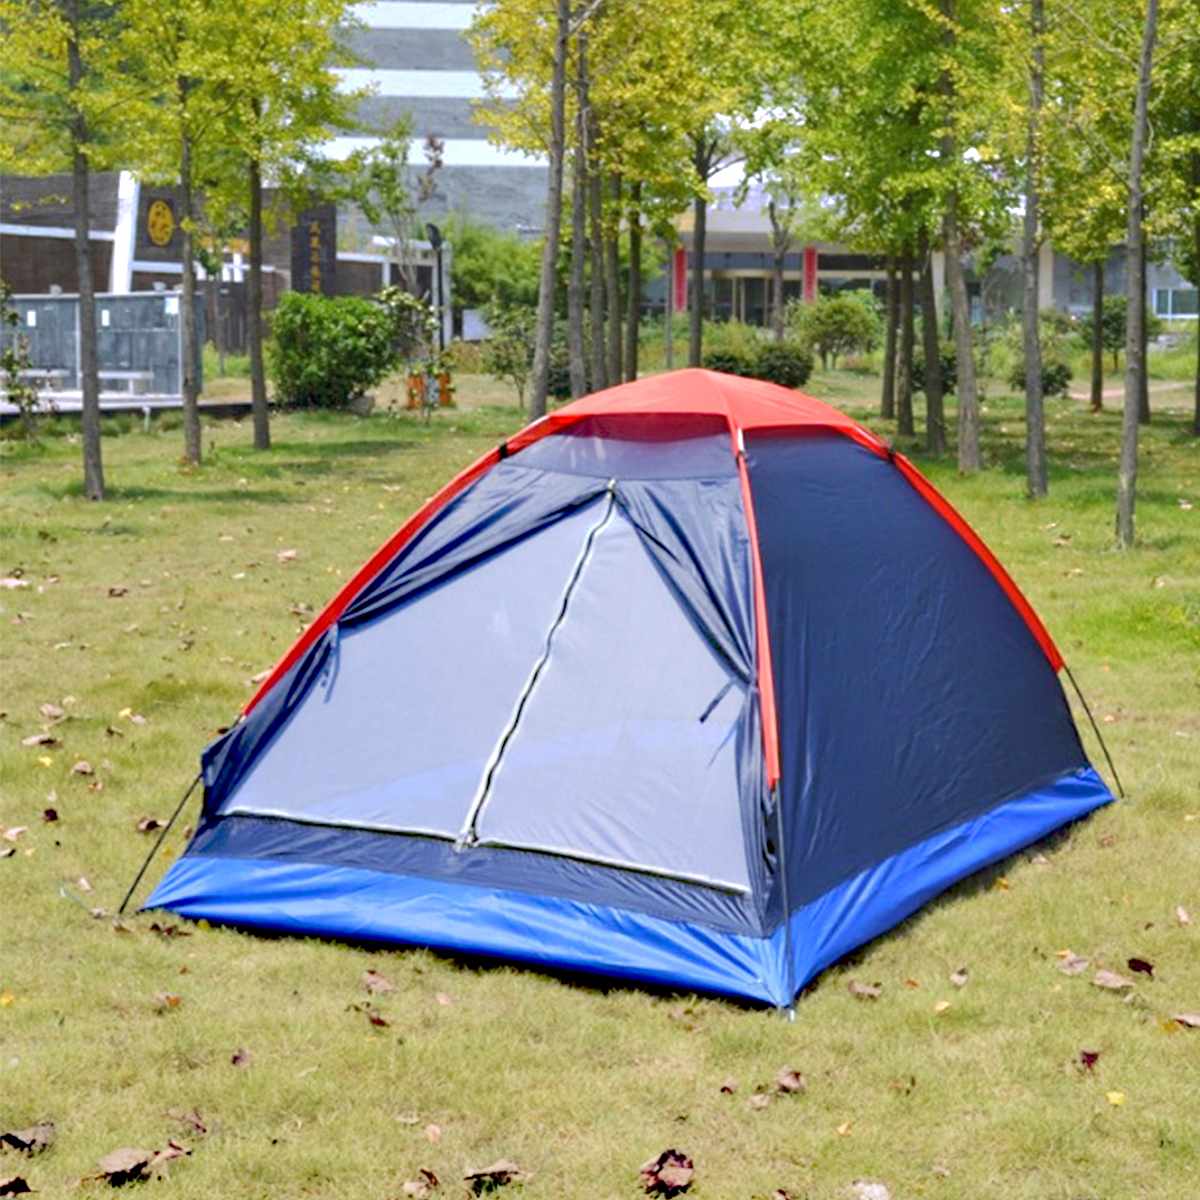 2 People Outdoor Travel Outdoor Camping Tent Beach Tent Kit Fishing Tent with Carry Bag for Hiking Traveling Fiberglass Pole